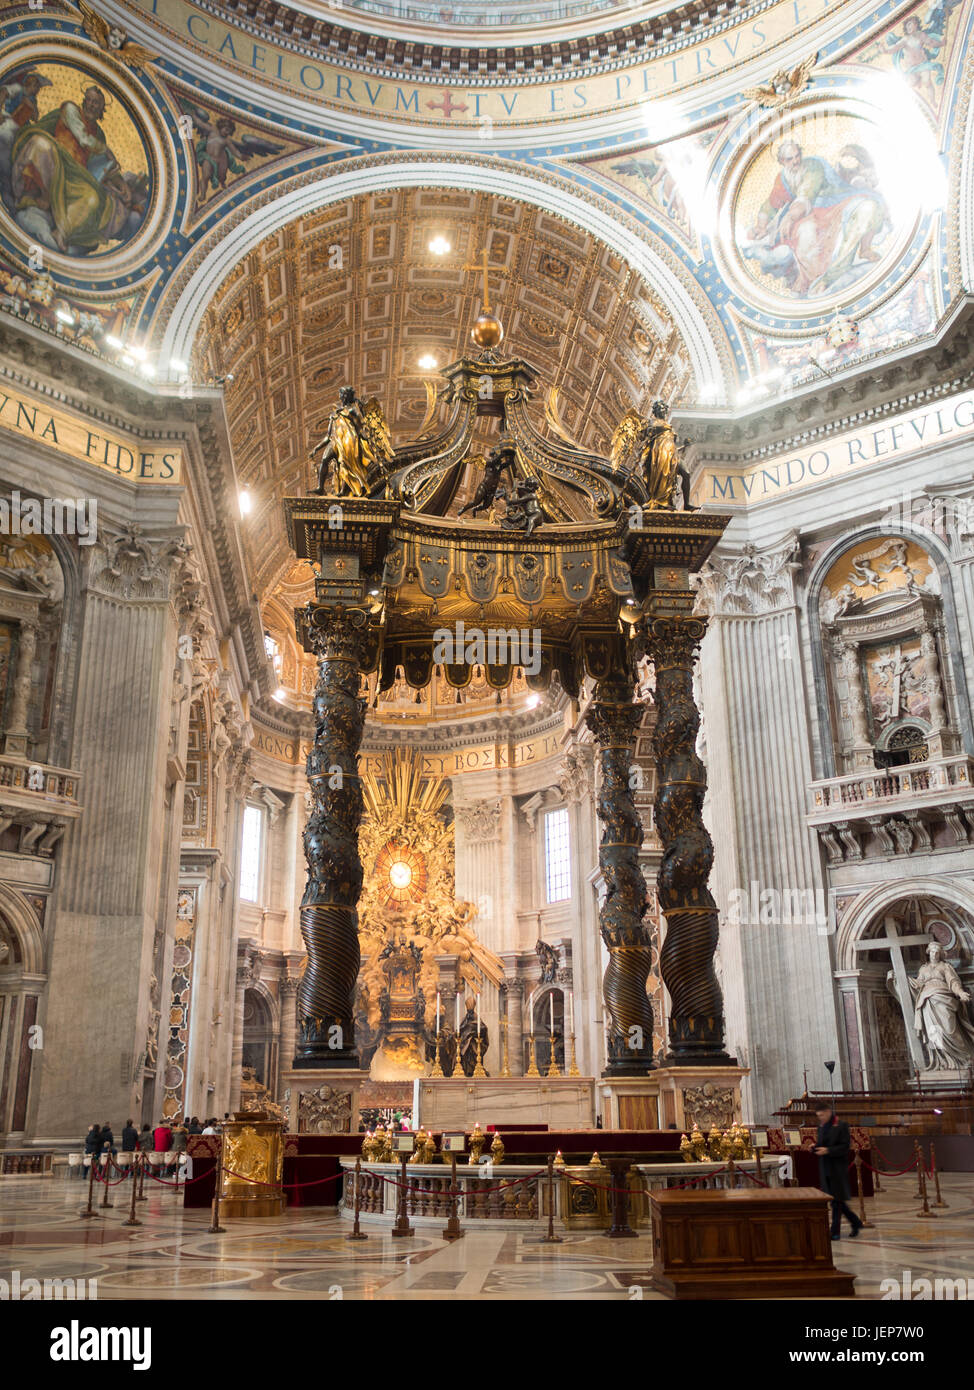 St Peter's Basilica central altar Stock Photo